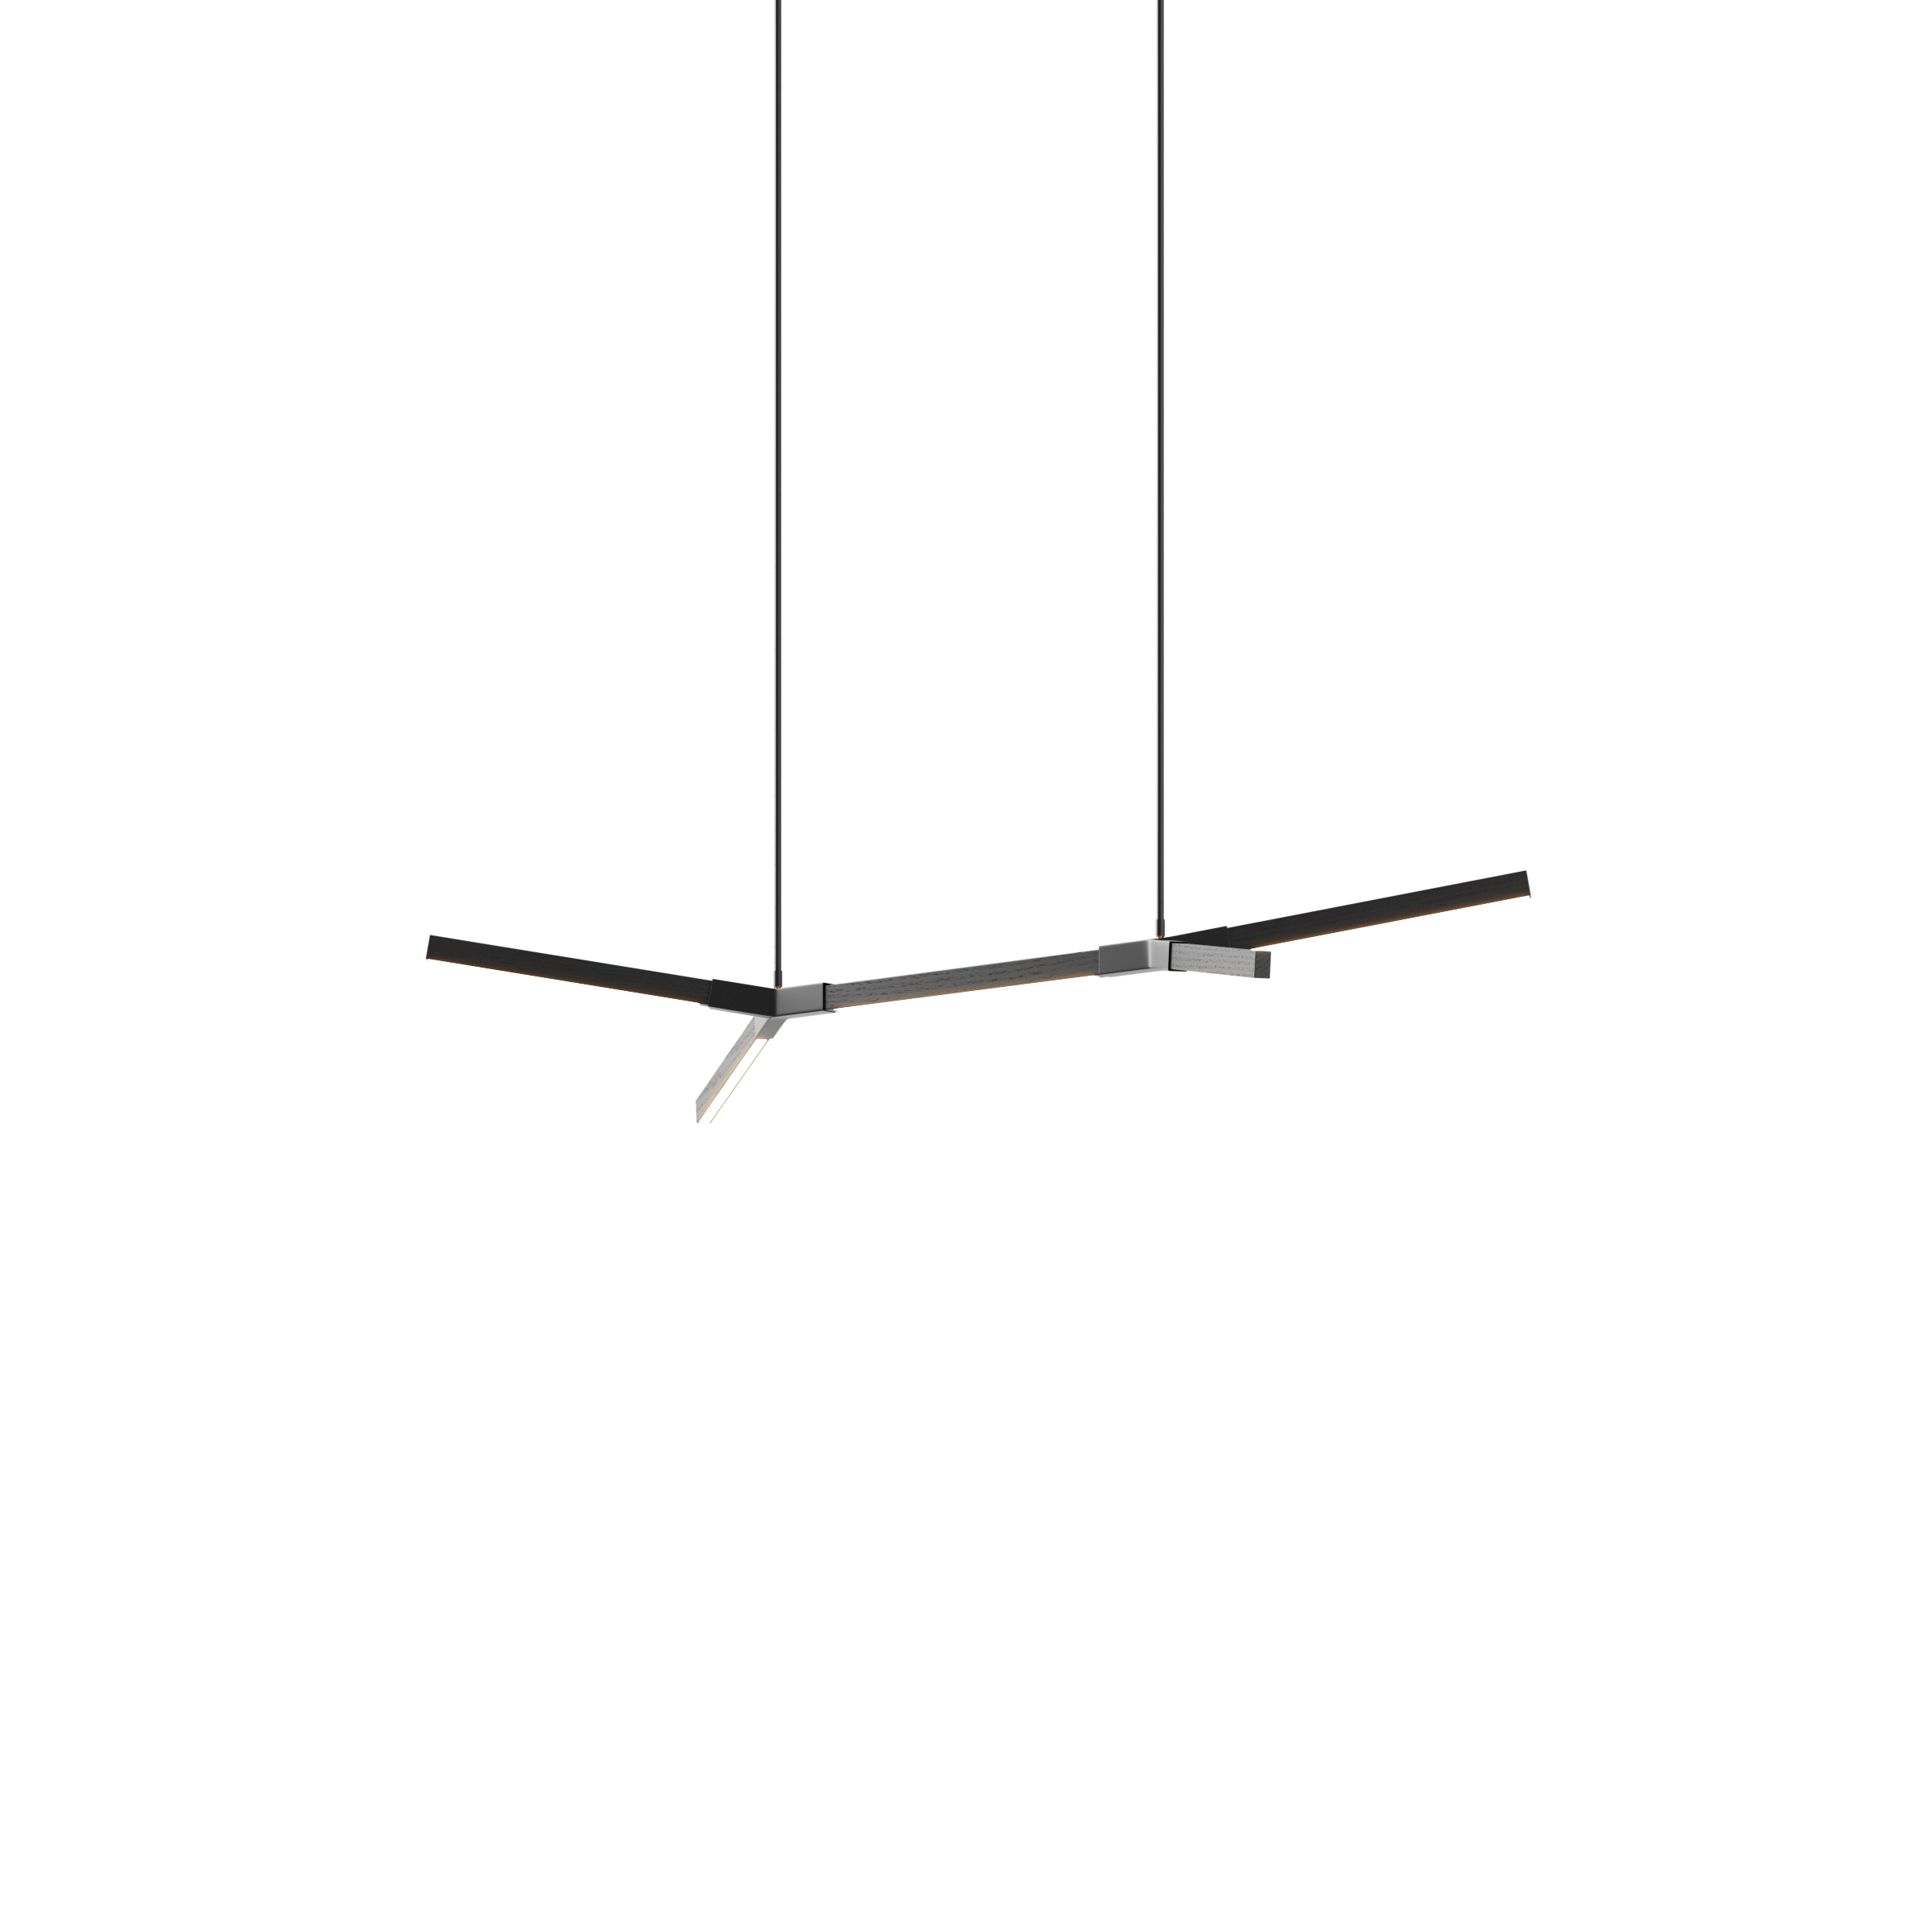 Image of a Stickbulb Double Bough lighting fixture. The modern fixture consists of sleek wooden beams with multiple integrated LED bulbs.